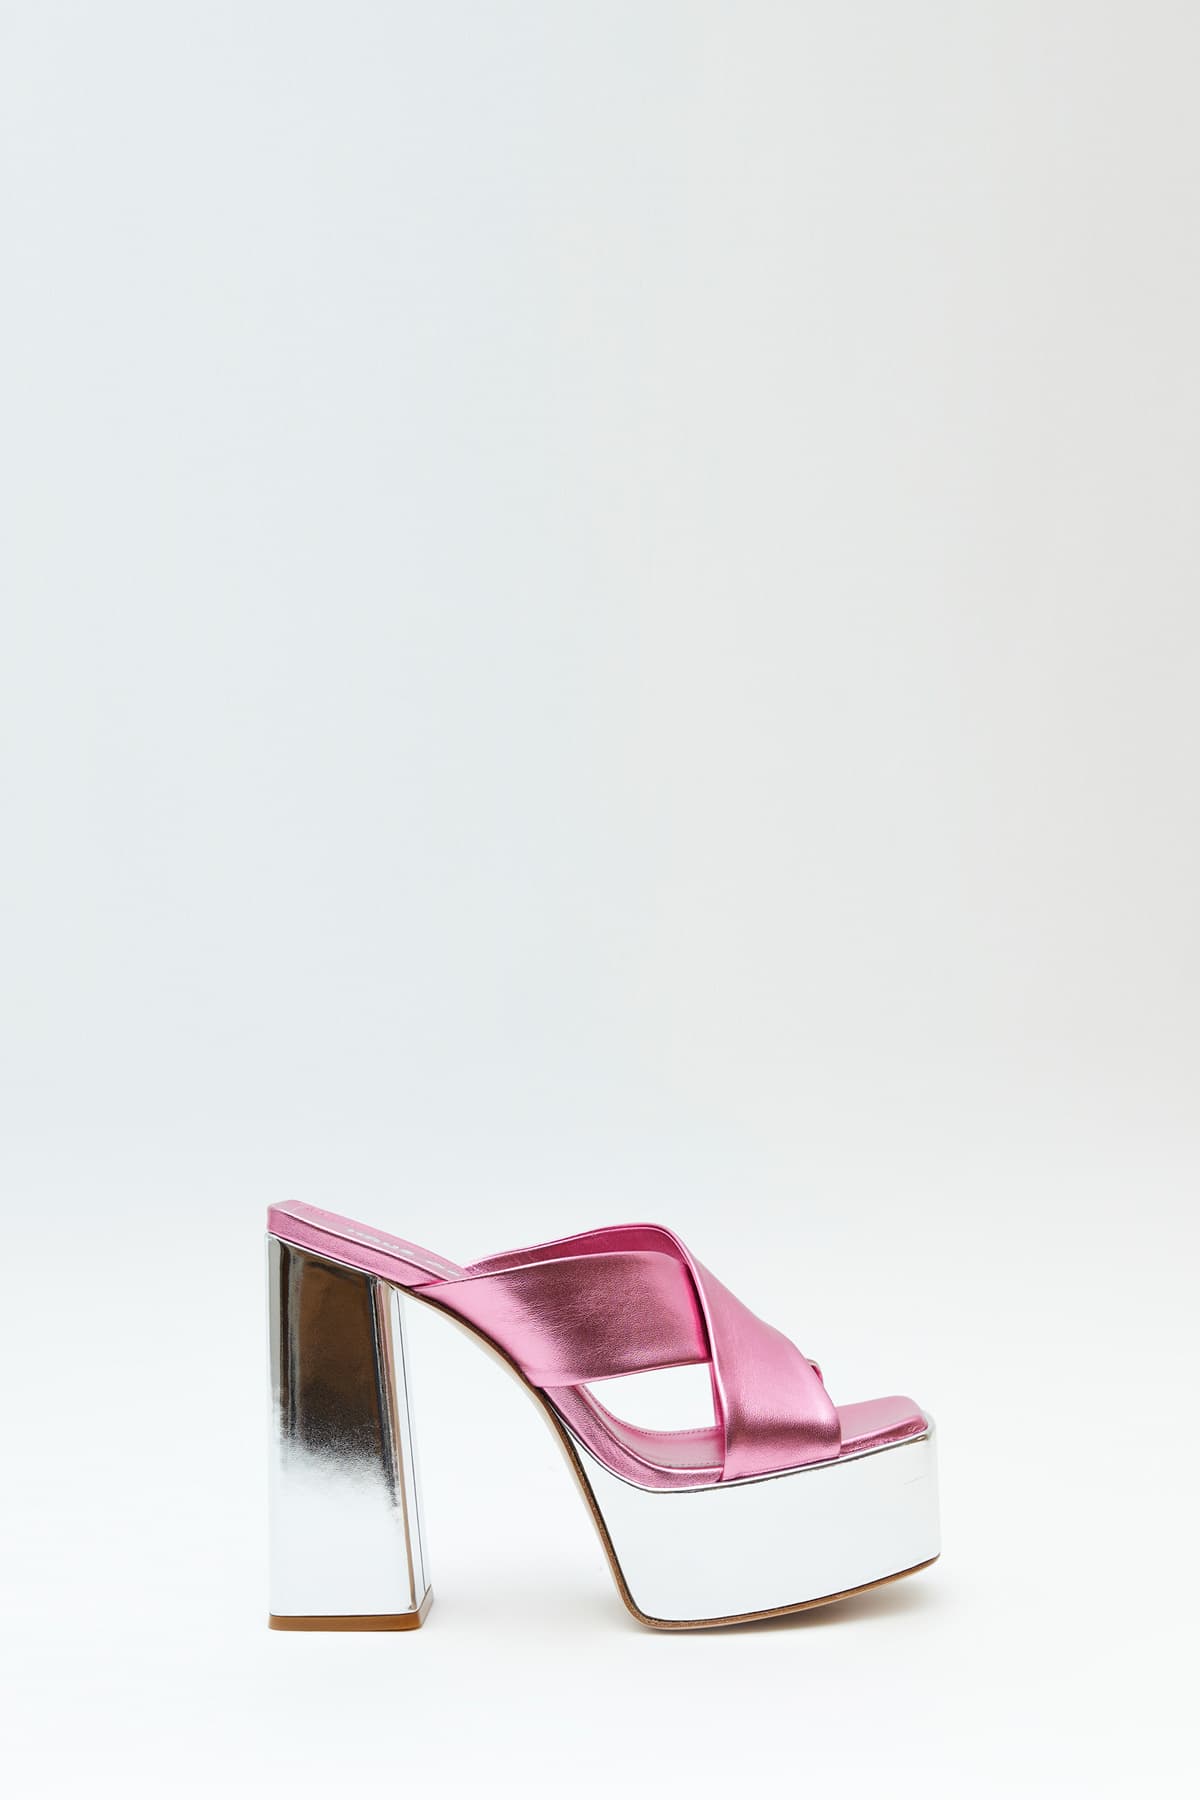 Sideview of The Wannabe sandal in silver and pink from the Haus of Honey fall-winter 2023-24